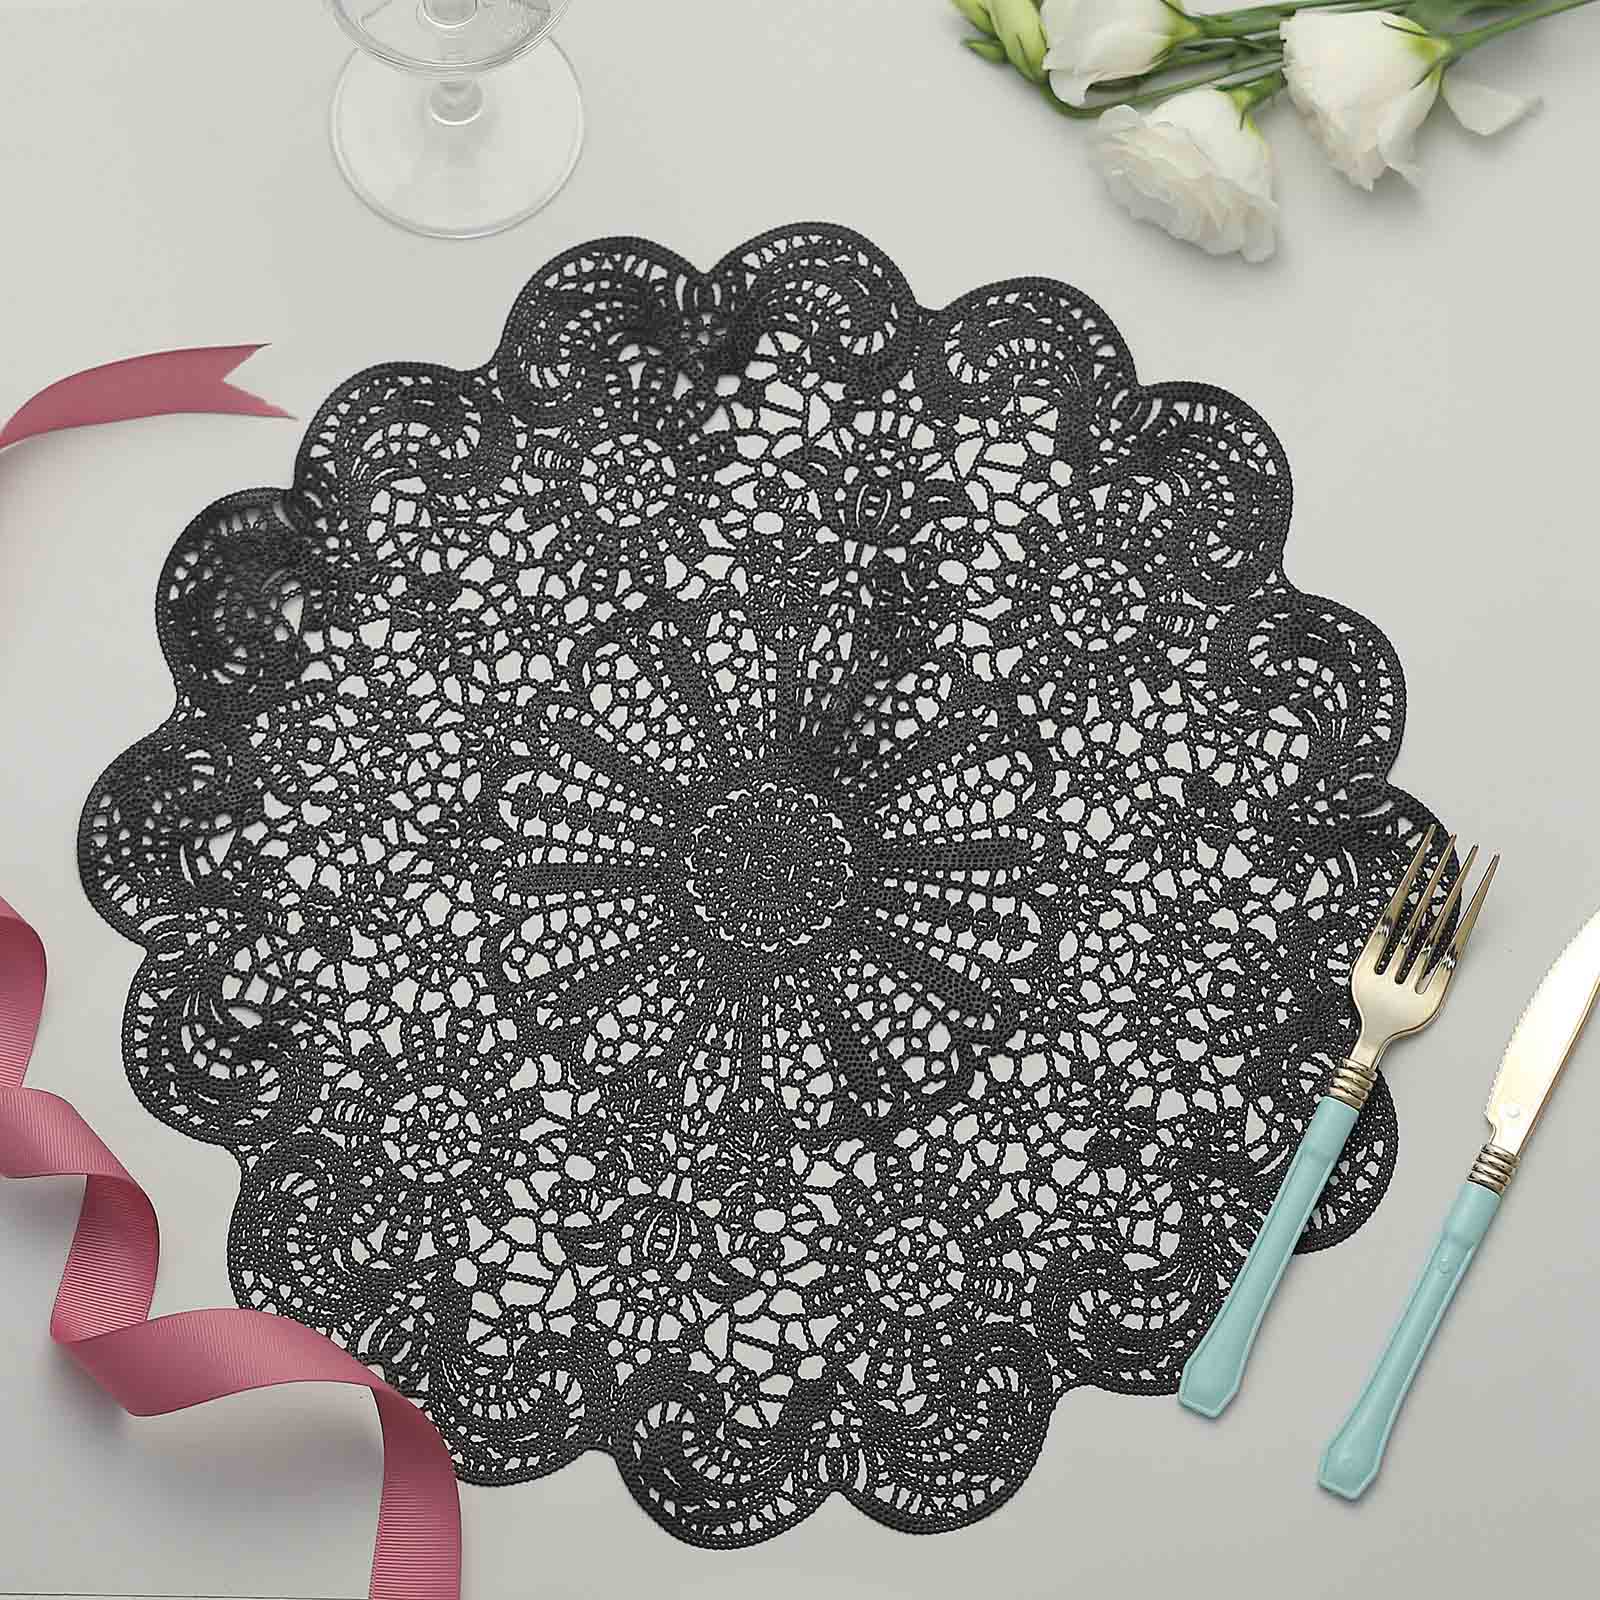 Efavormart 100 Pack Round White Paper Doilies, Food Grade Lace Paper Placemats - 12 inch